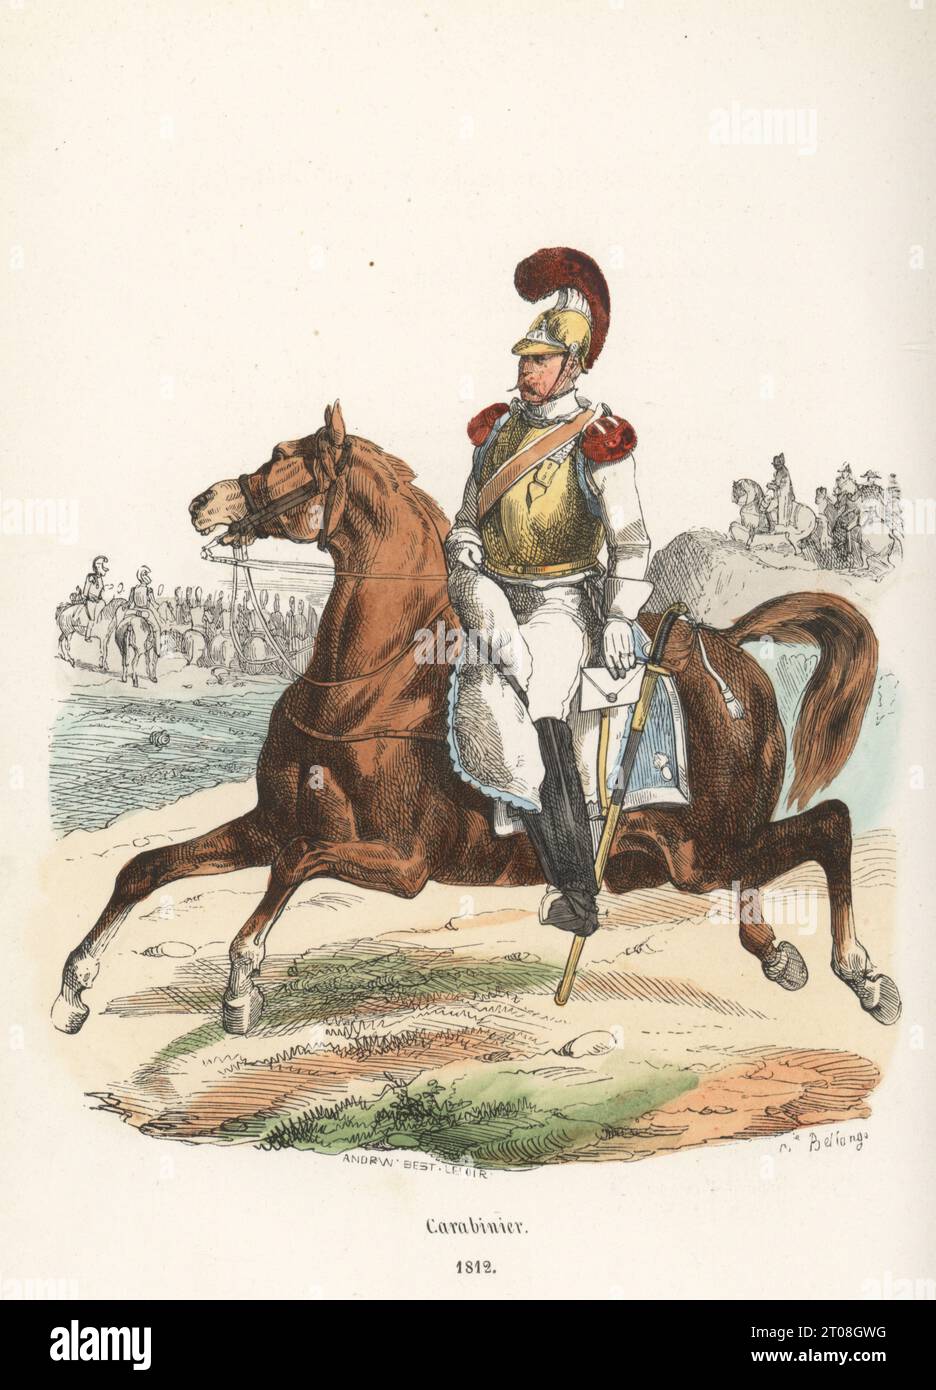 French Horse Carabinier carrying a letter, 1812. In brass helmet with crest or chenille, brass cuirass, white coat and breeches, red epaulettes, boots. Armed with straight sword. Mouton shabrack. 2nd Carabiniers regiment. Handcoloured woodcut by Andrew Best Leloir after an illustration by Hippolyte Bellangé from P.M. Laurent de l’Ardeche’s Histoire de Napoleon, Paris, 1840. Stock Photo